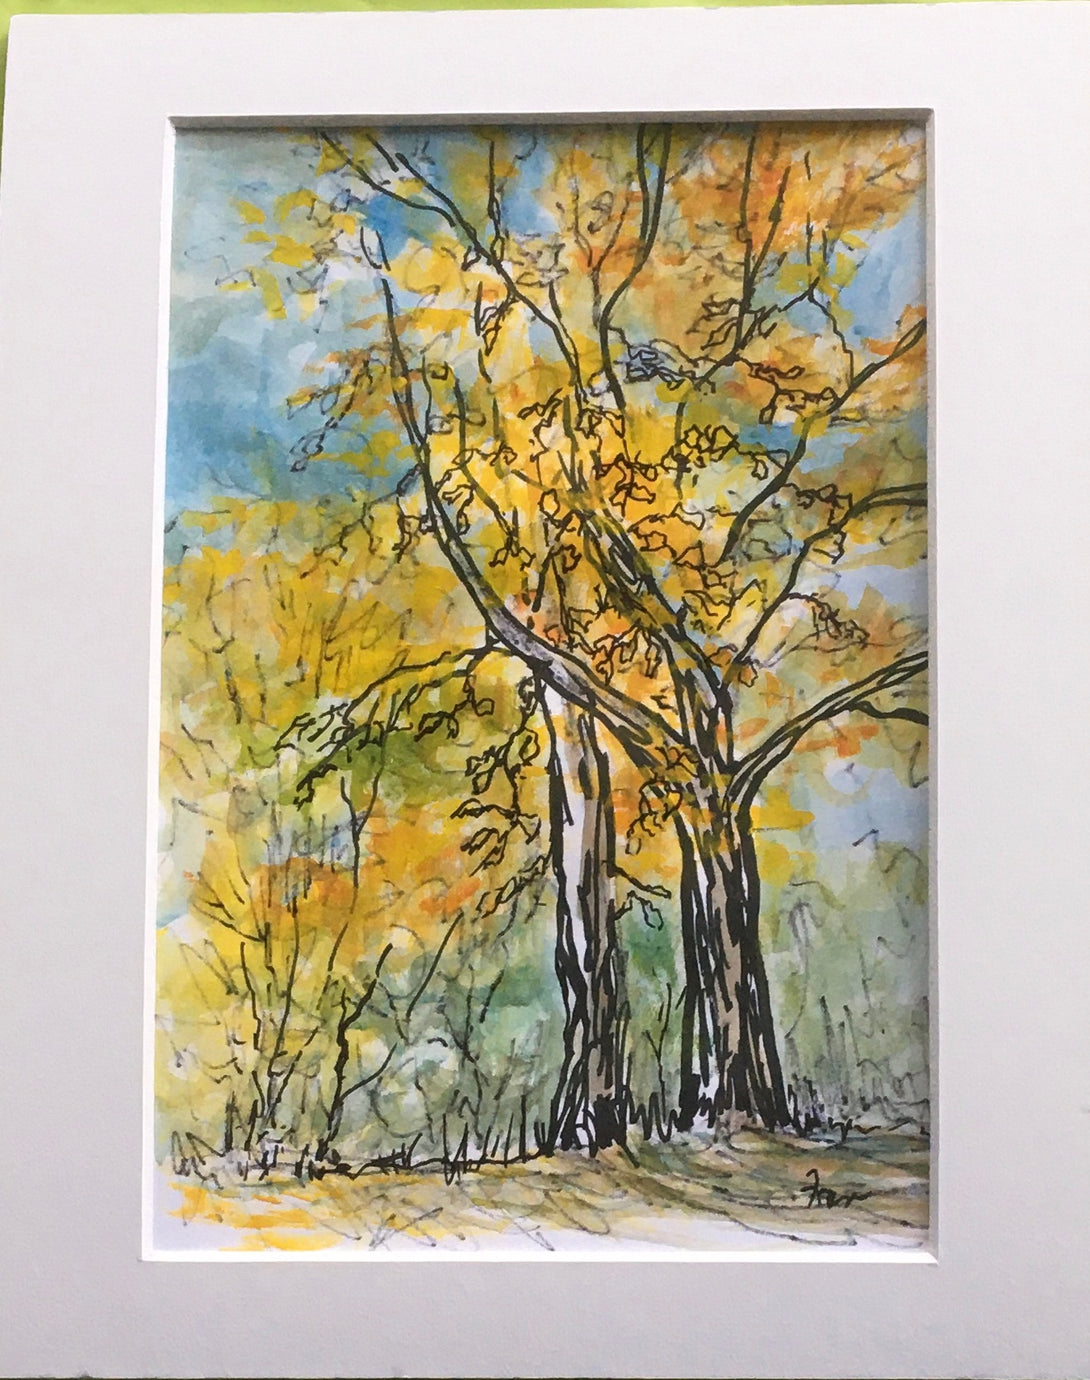 Fran Renwick - Watercolour Painting -  Yellow Trees, matted, unframed - Fran Renwick - McMillan Arts Centre Gallery, Gift Shop and Box Office - Vancouver Island Art Gallery